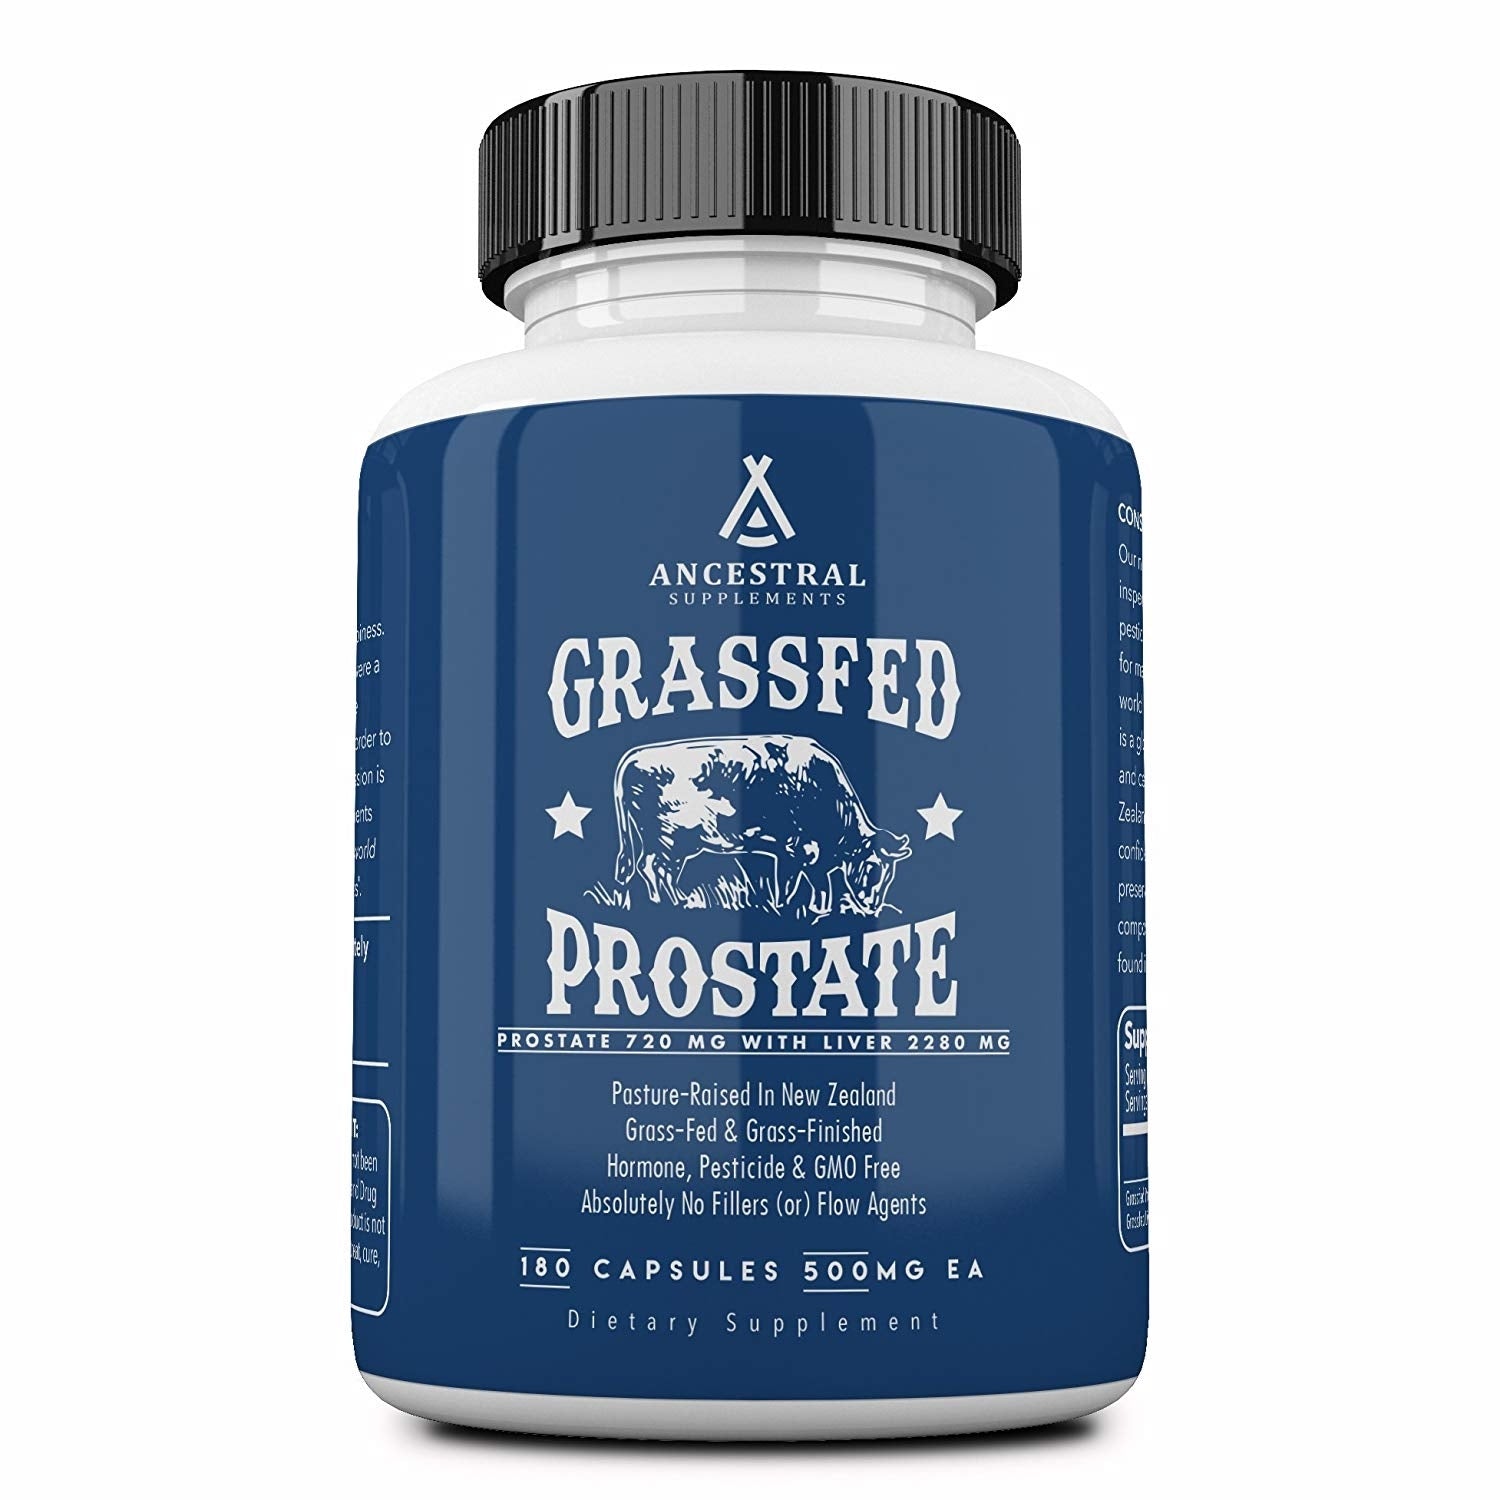 Grassfed Beef Prostate - 180 capsules